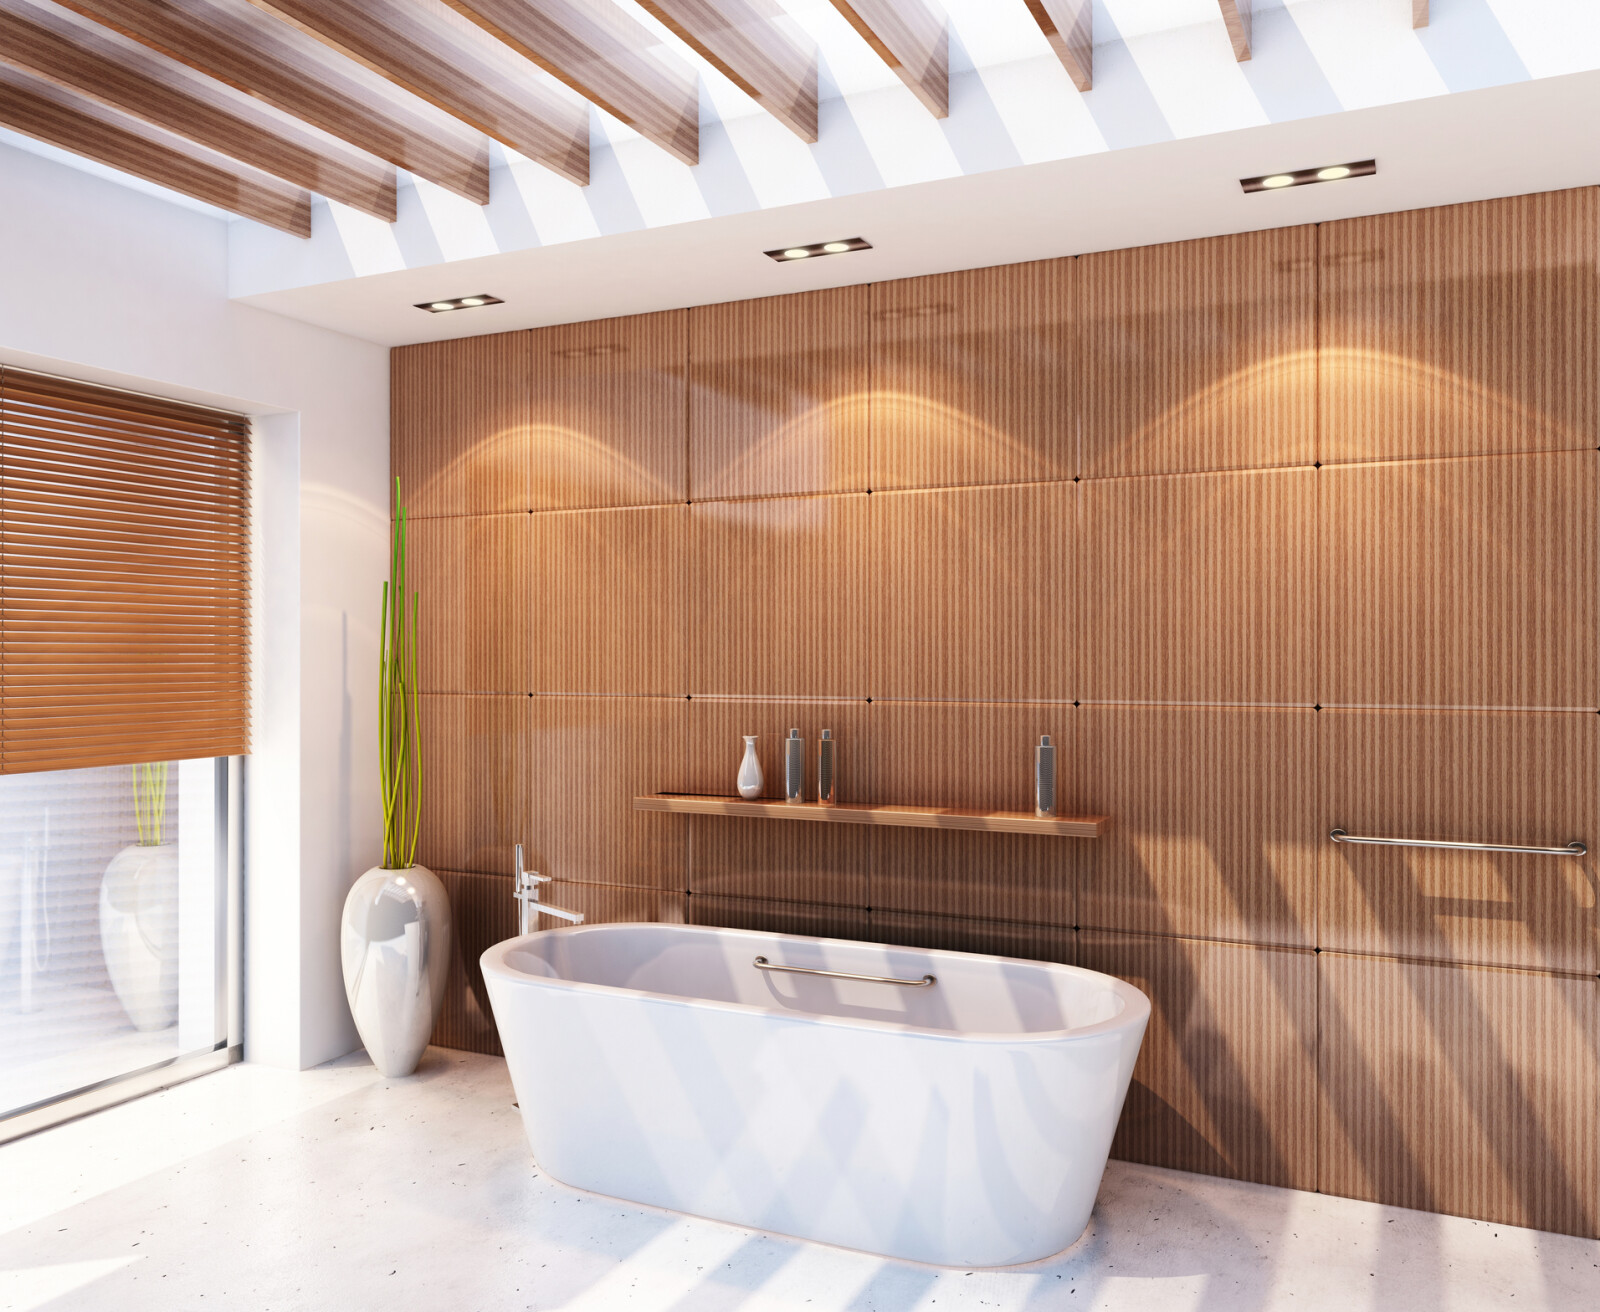 Digital lifestyle image of a Scandi inspired Hotel style bathroom, featuring a white stone floor, wood panelled walls with integrated shelving, a freestanding bath with floorstanding bathtap and handset shower attachment, wooden slotted blinds and a large potted succulent